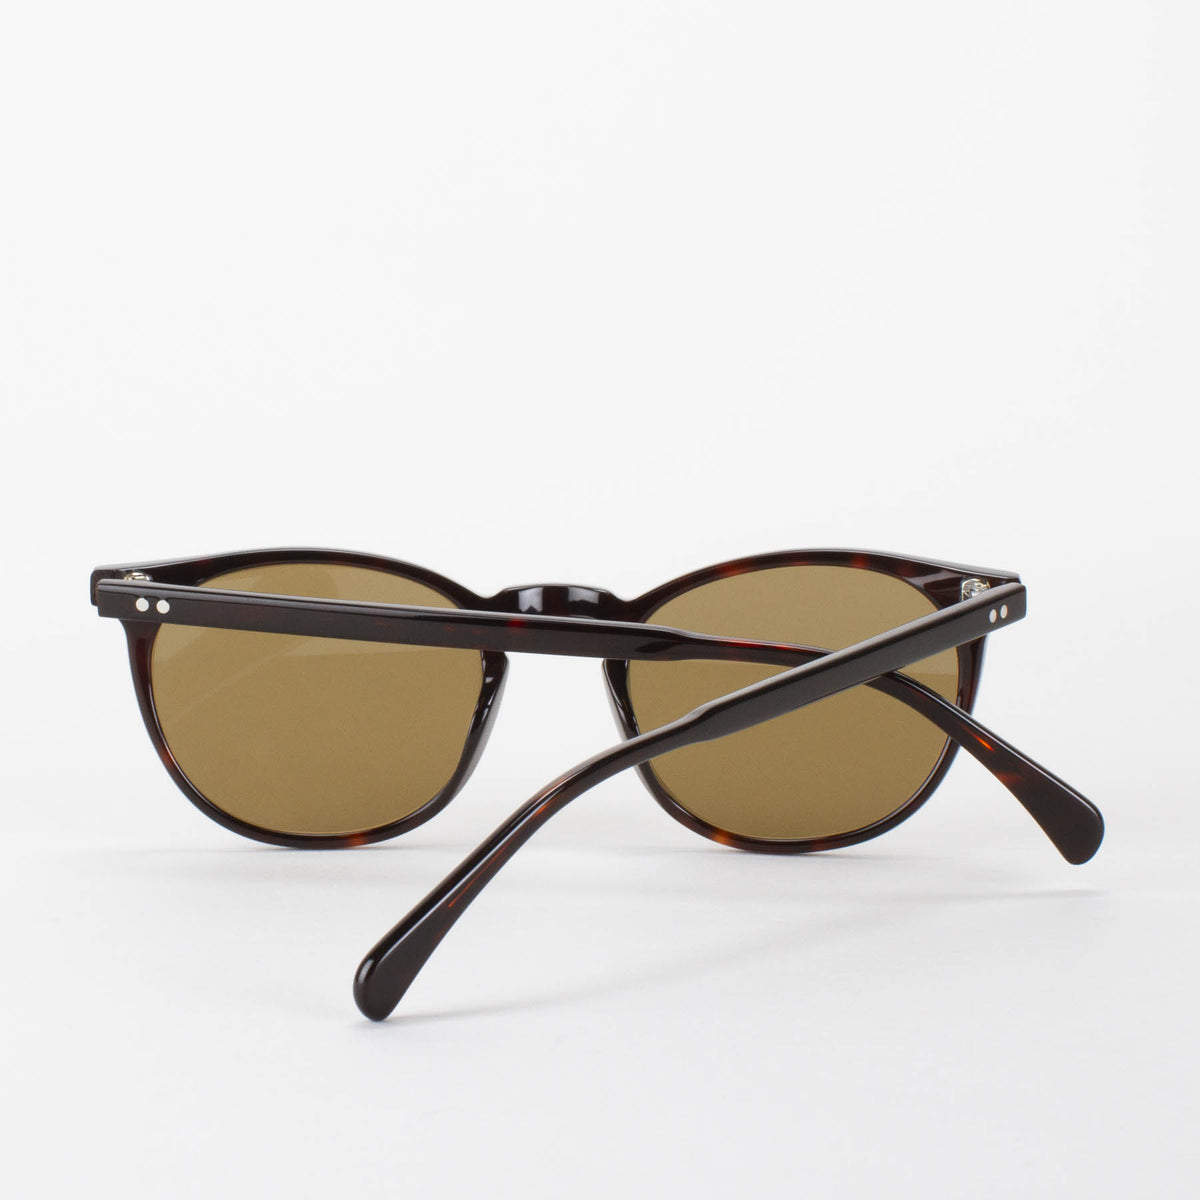 'Out of' Modena Fashion Sunglasses. Back View.